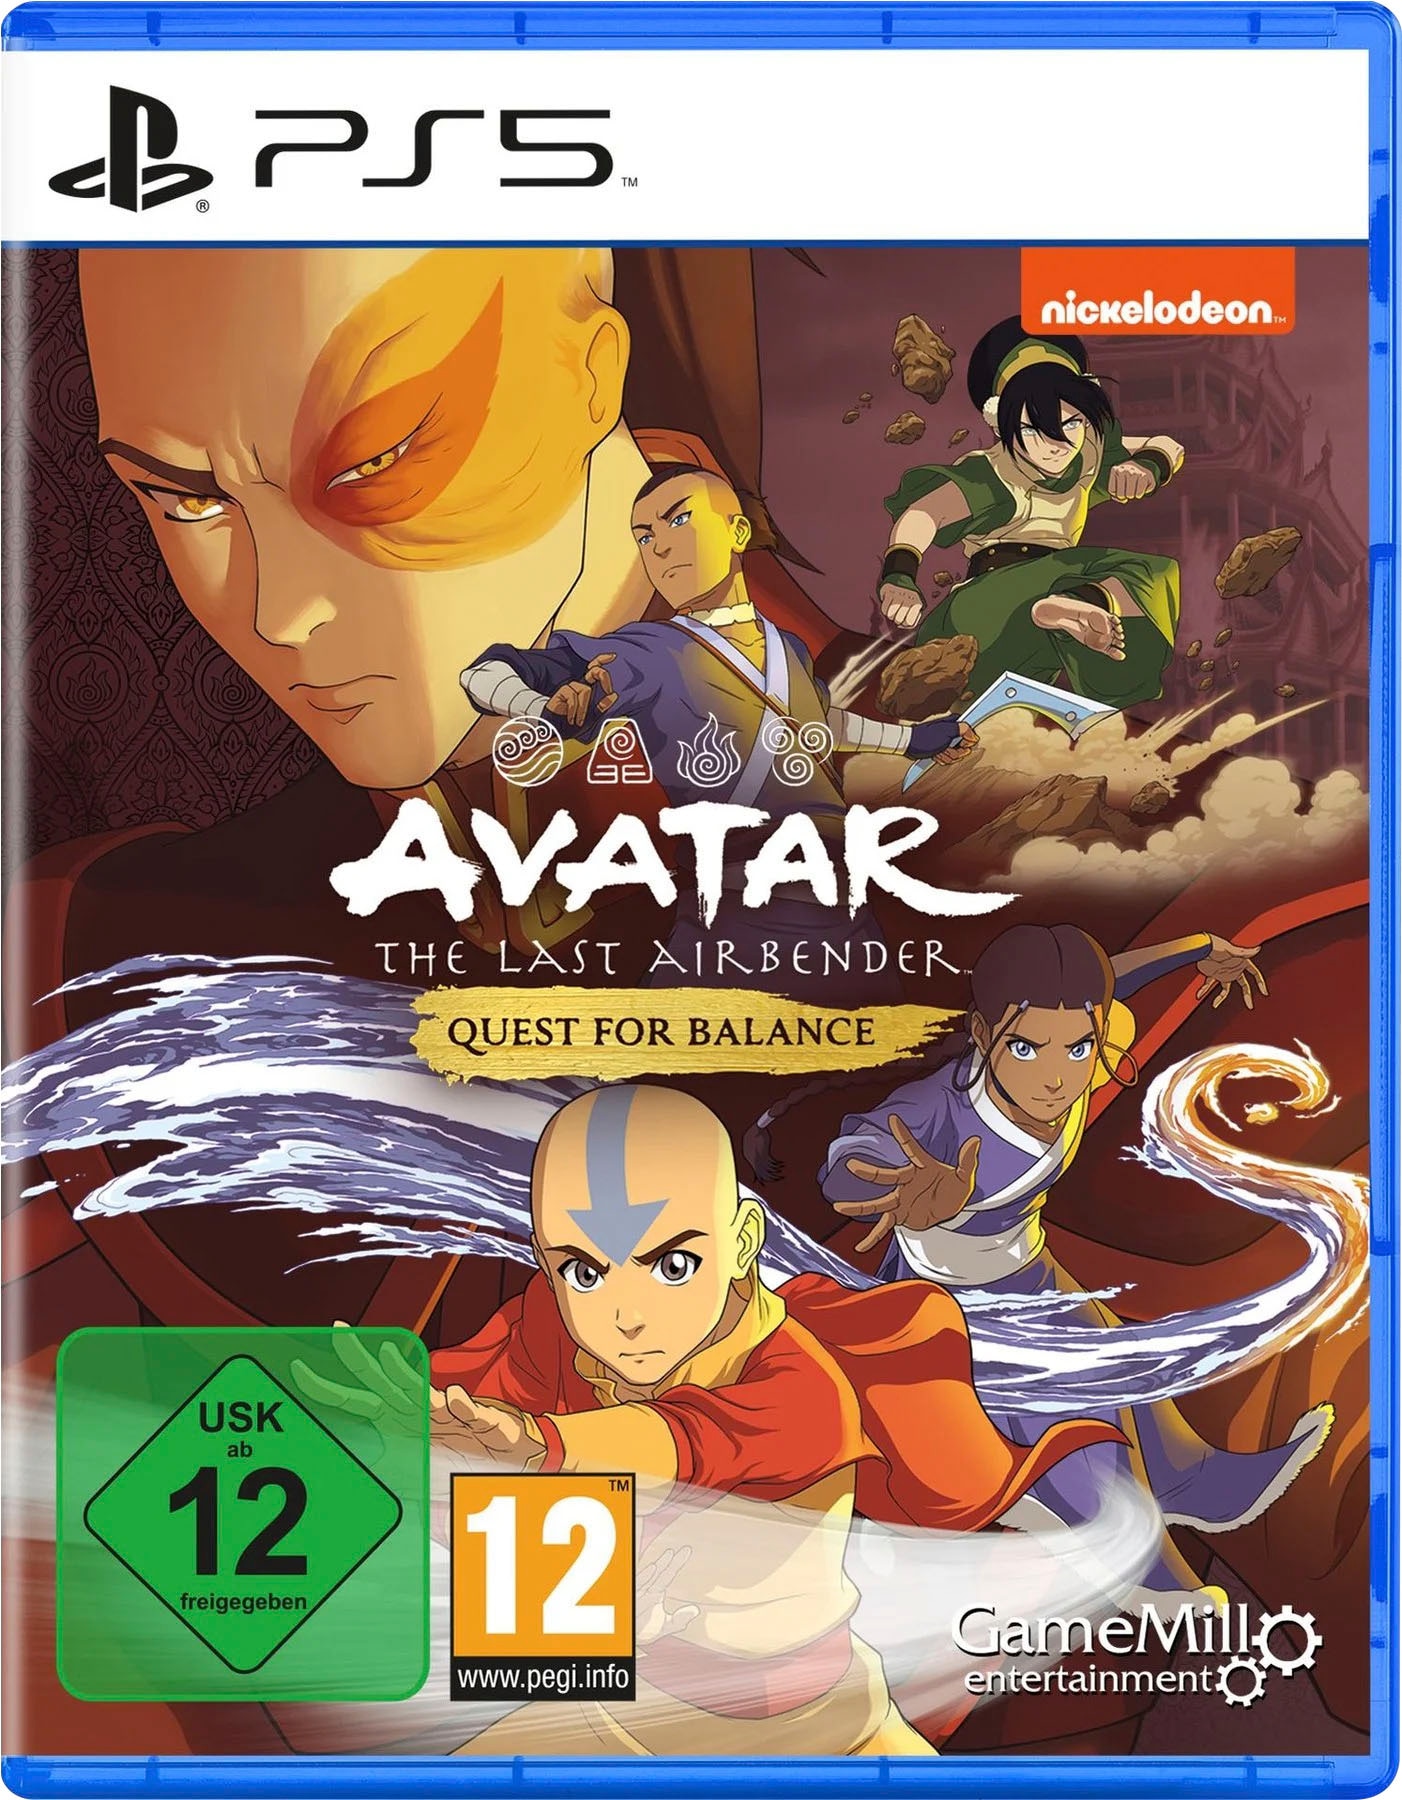 NBG Spielesoftware »Avatar: The Last Airbender - Quest for Balance«, PlayStation 5